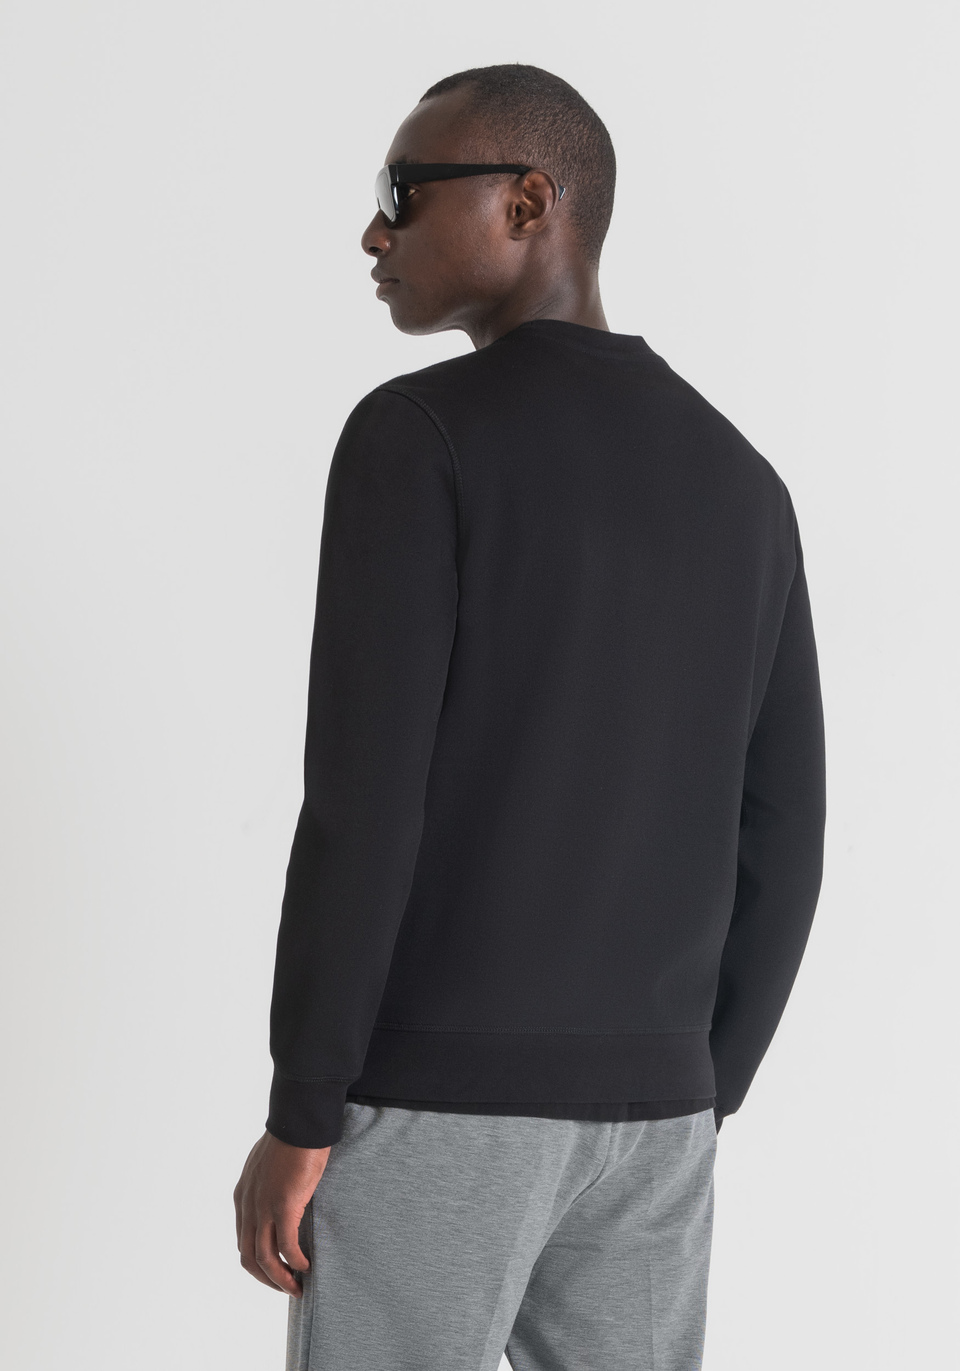 REGULAR-FIT CREW-NECK SWEATSHIRT IN COTTON BLEND WITH EMBROIDERED LOGO ON THE CHEST - Antony Morato Online Shop